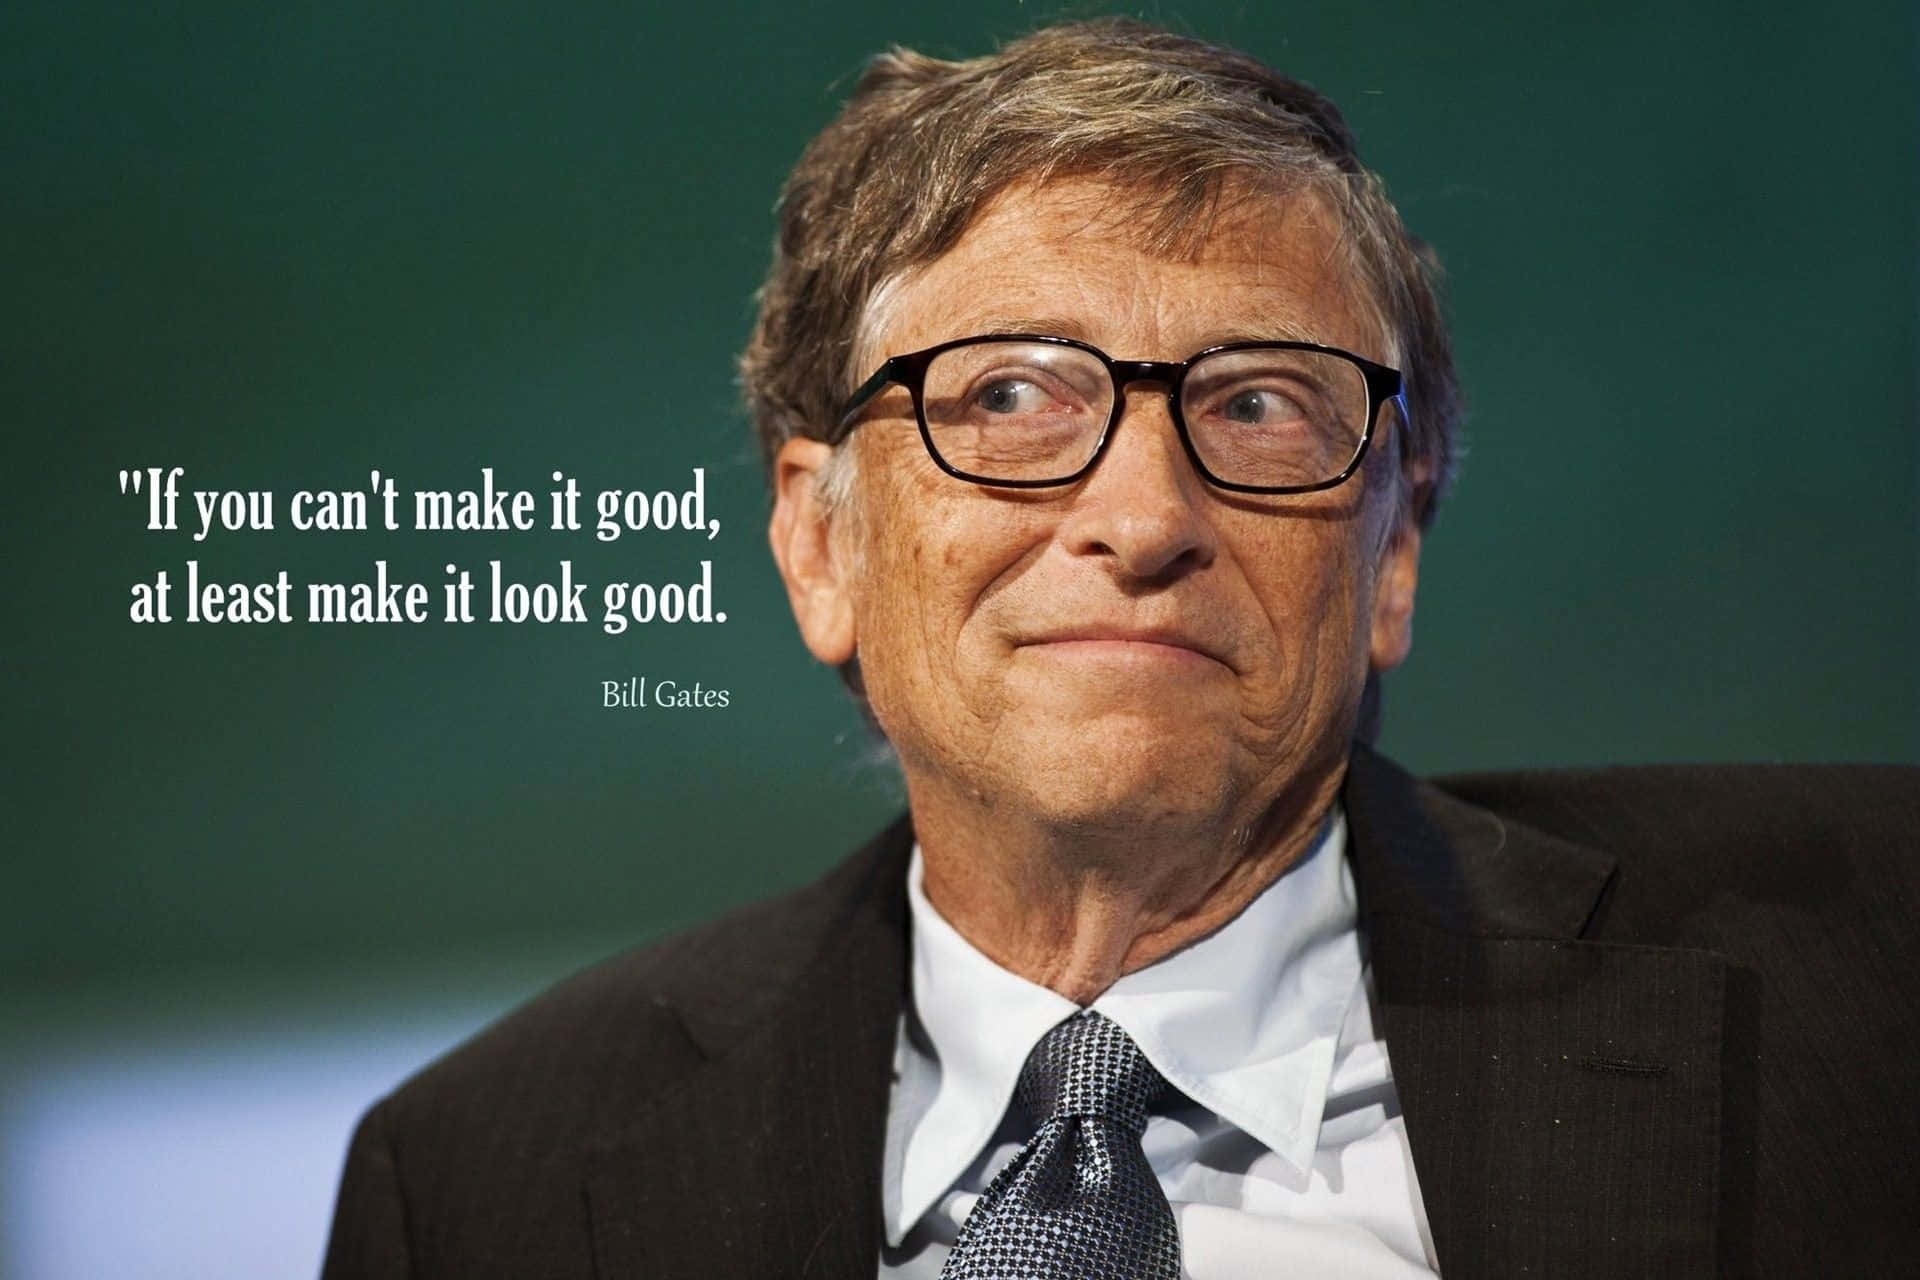 Download Bill Gates 1920 X 1280 Background | Wallpapers.com